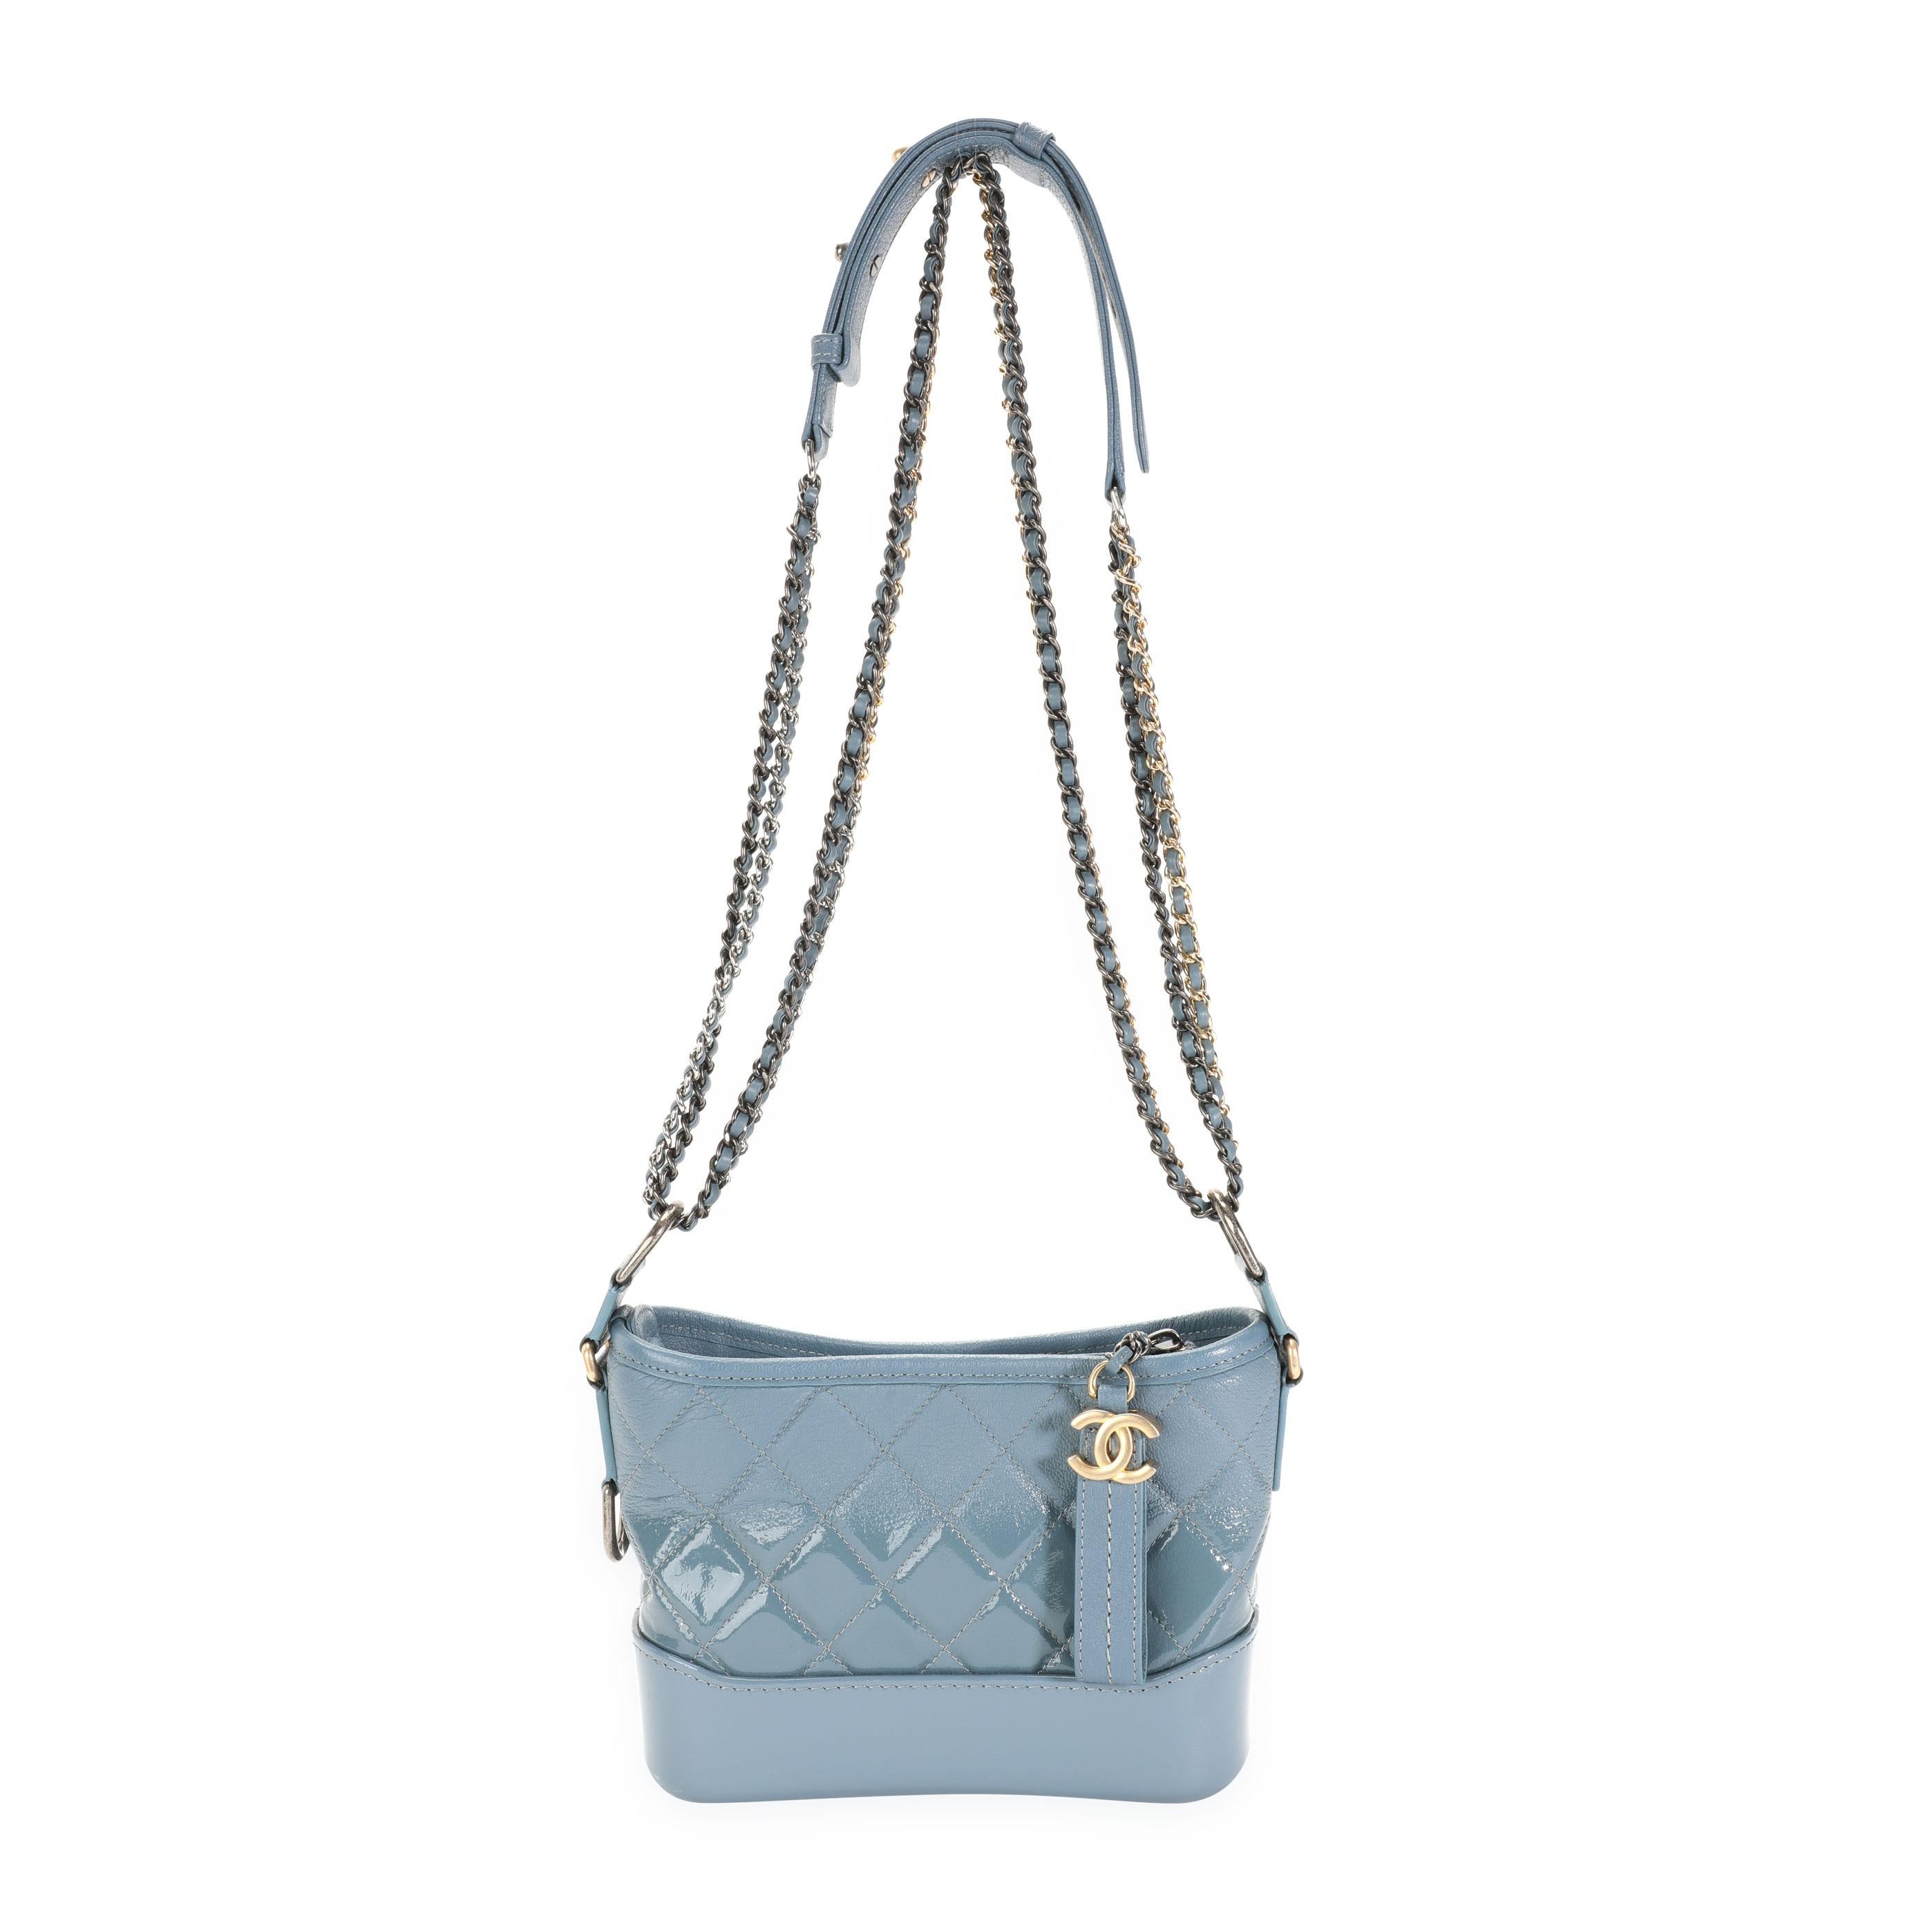 Chanel Blue Ombré Quilted Patent Leather & Aged Calfskin Small Gabrielle Hobo
SKU: 112458
MSRP: USD 5,000.00
Condition: Pre-owned (3000)
Condition Description: 
Handbag Condition: Very Good
Condition Comments: Very Good Condition. Faint scratching